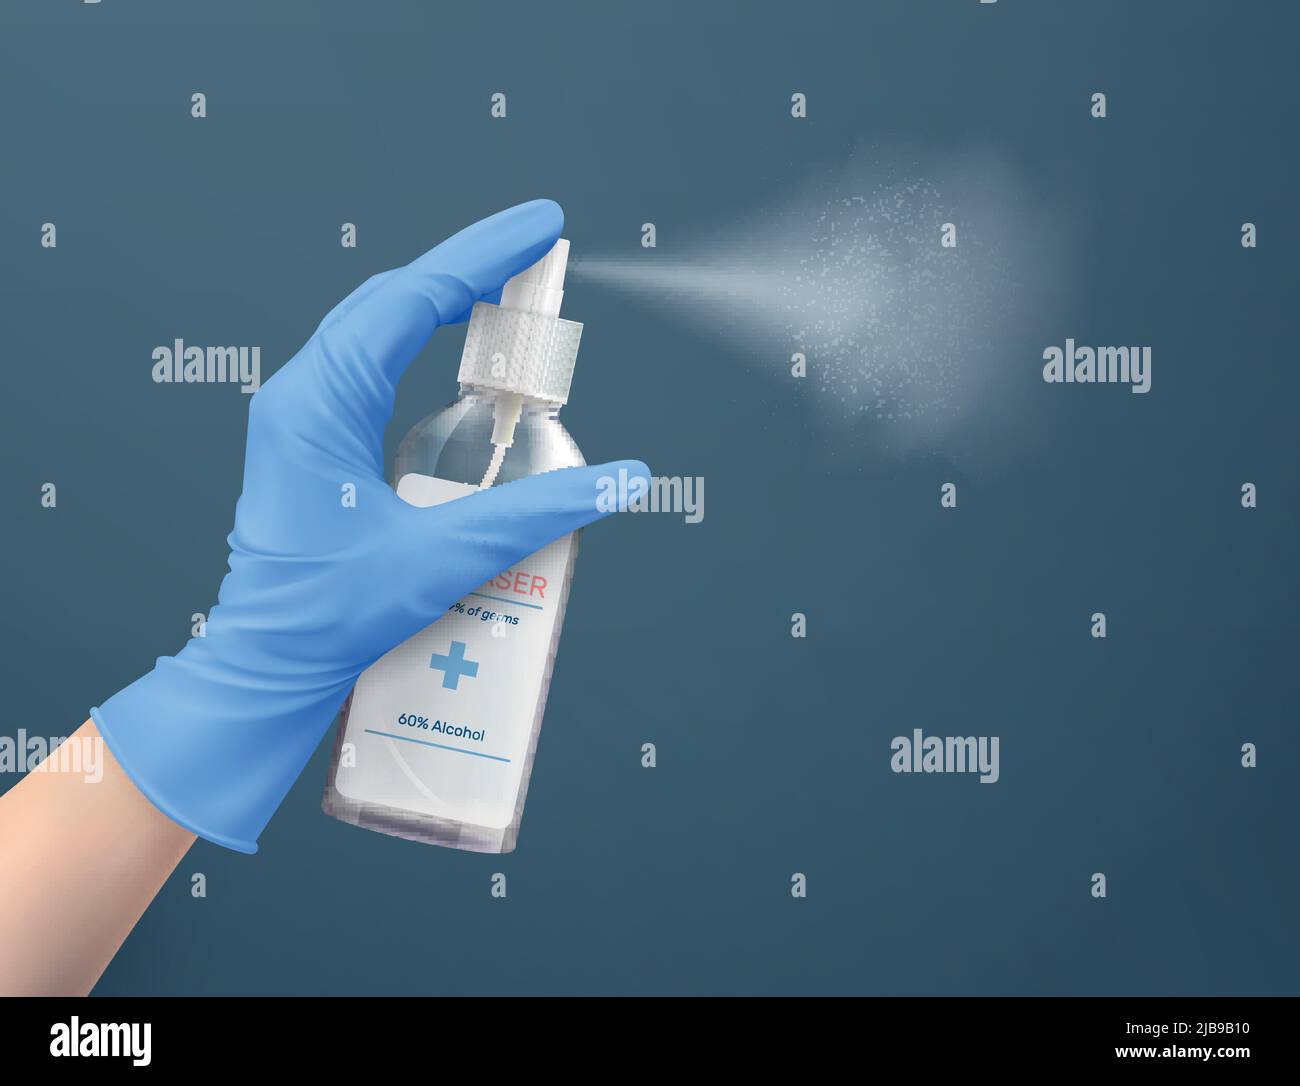 Sanitizer spray for desinfection and medical purpose realistic background vector illustration Stock Vector